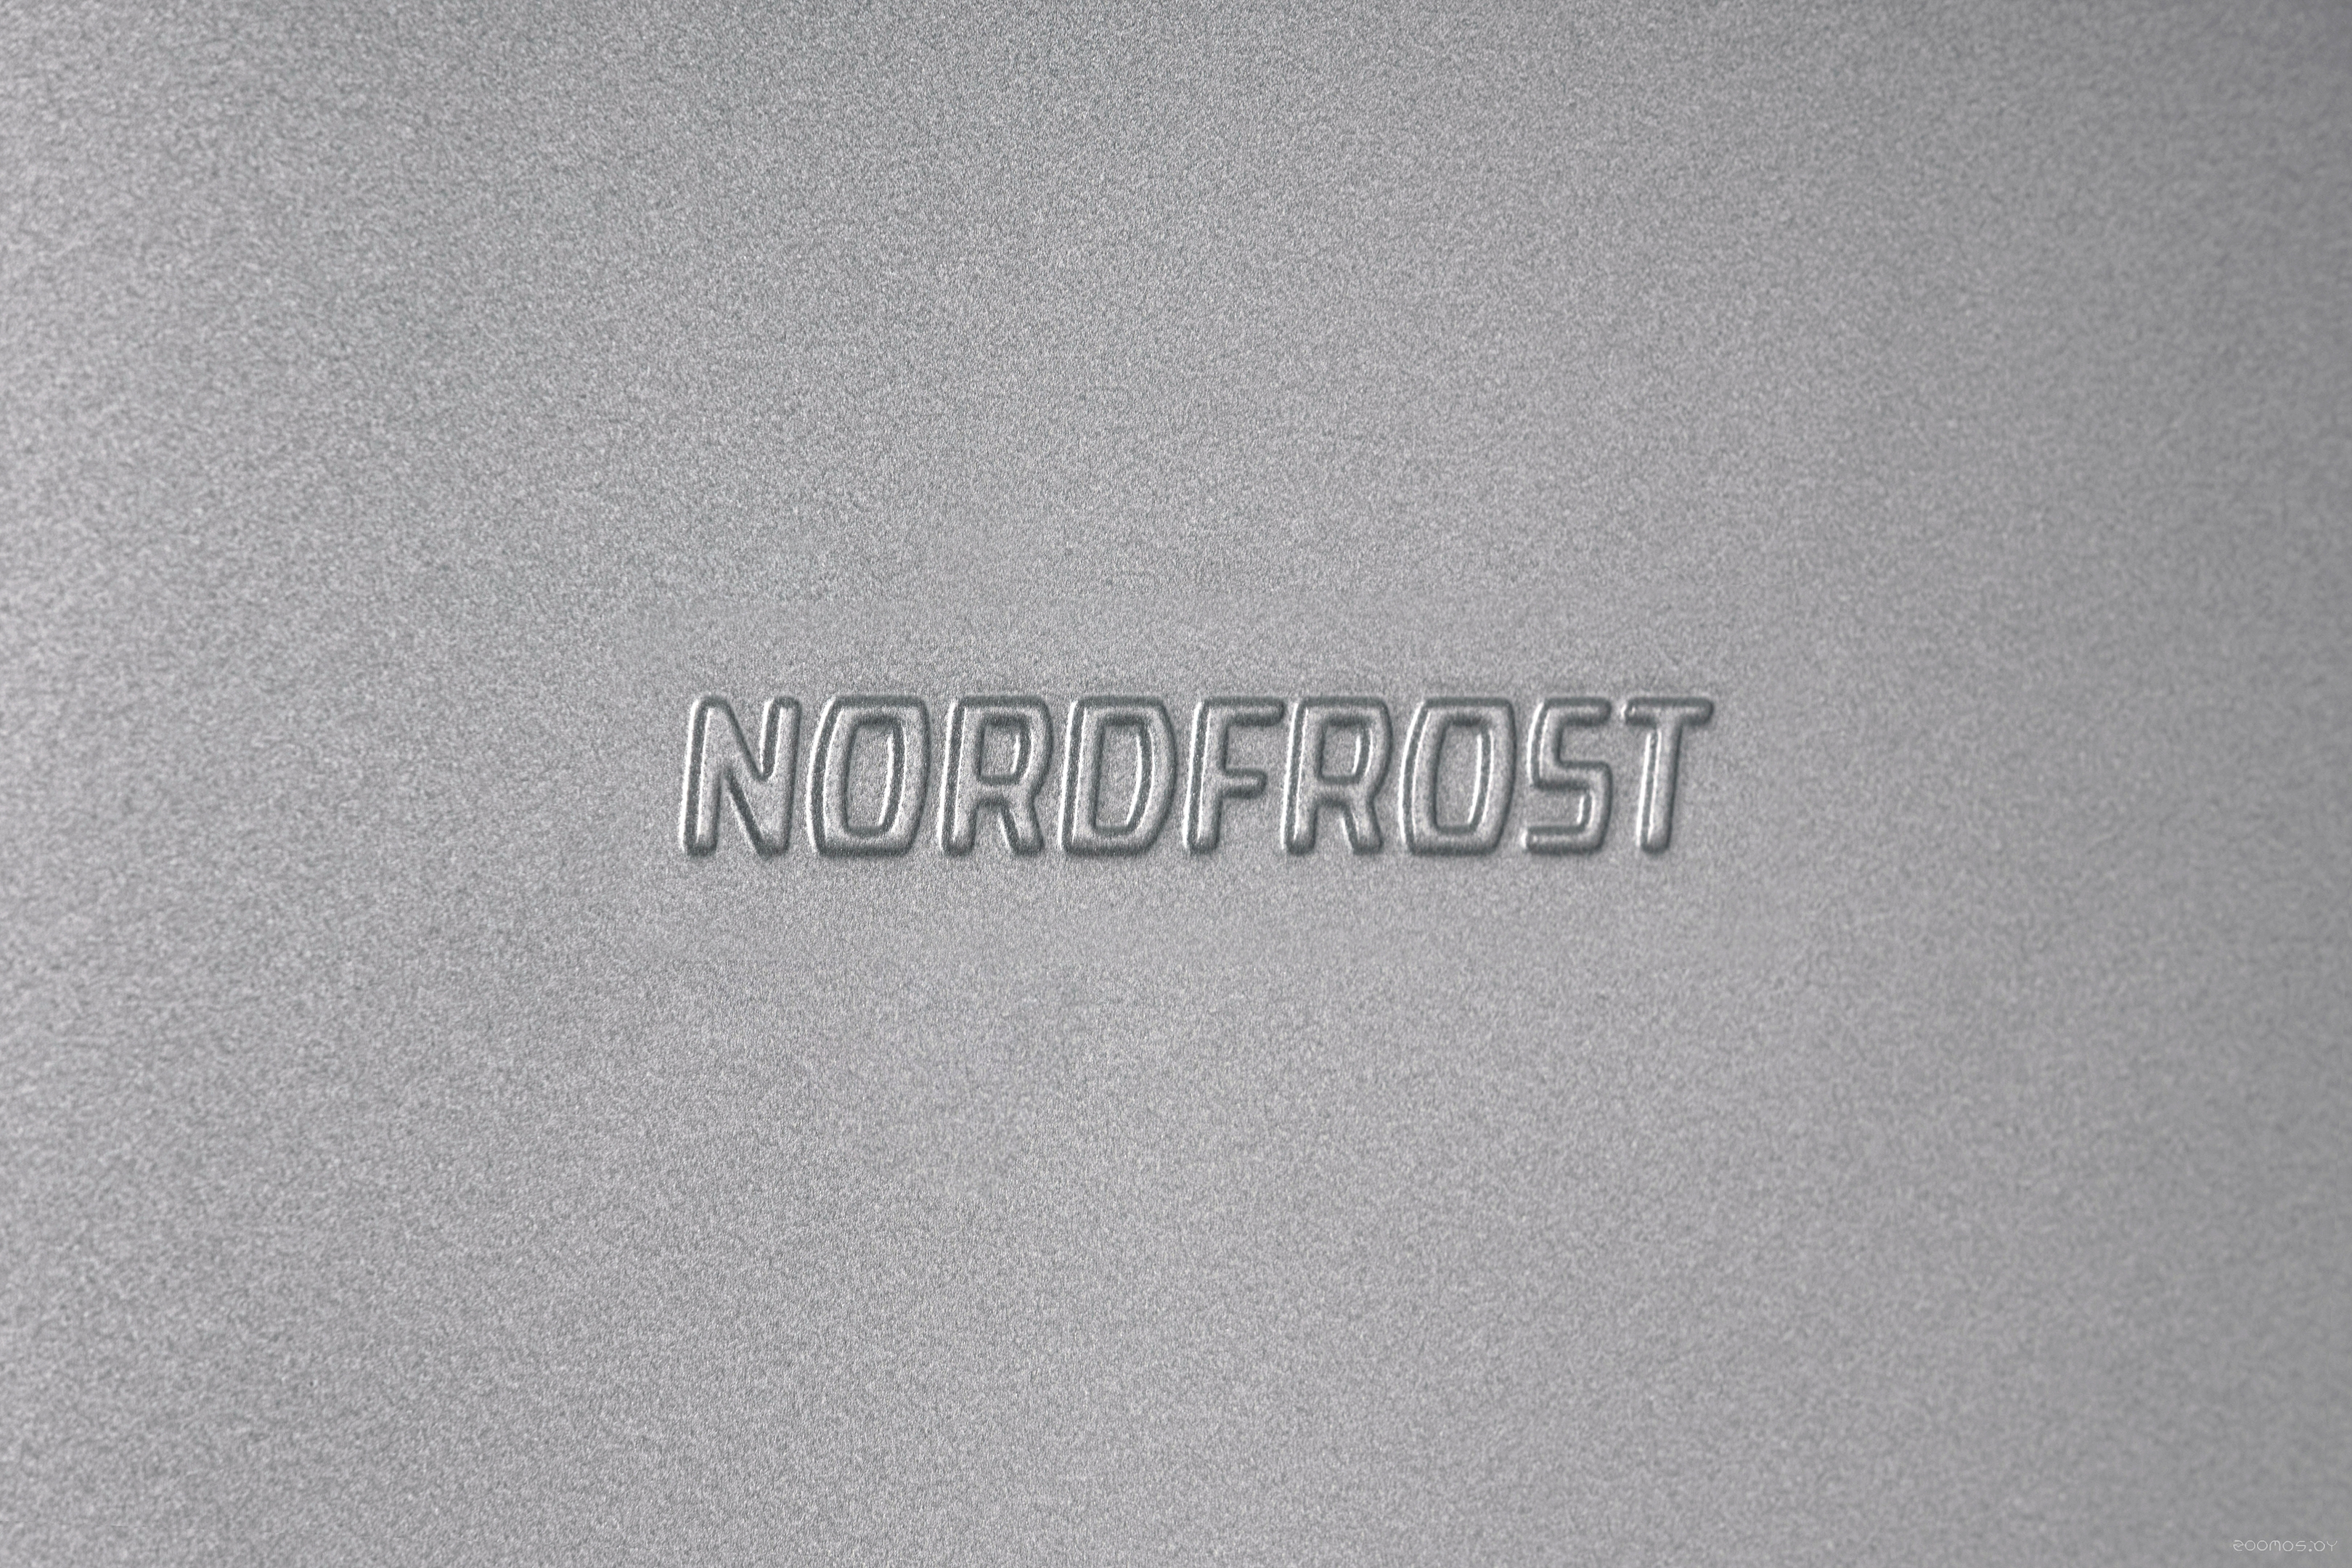   NORDFROST NR 402 S     